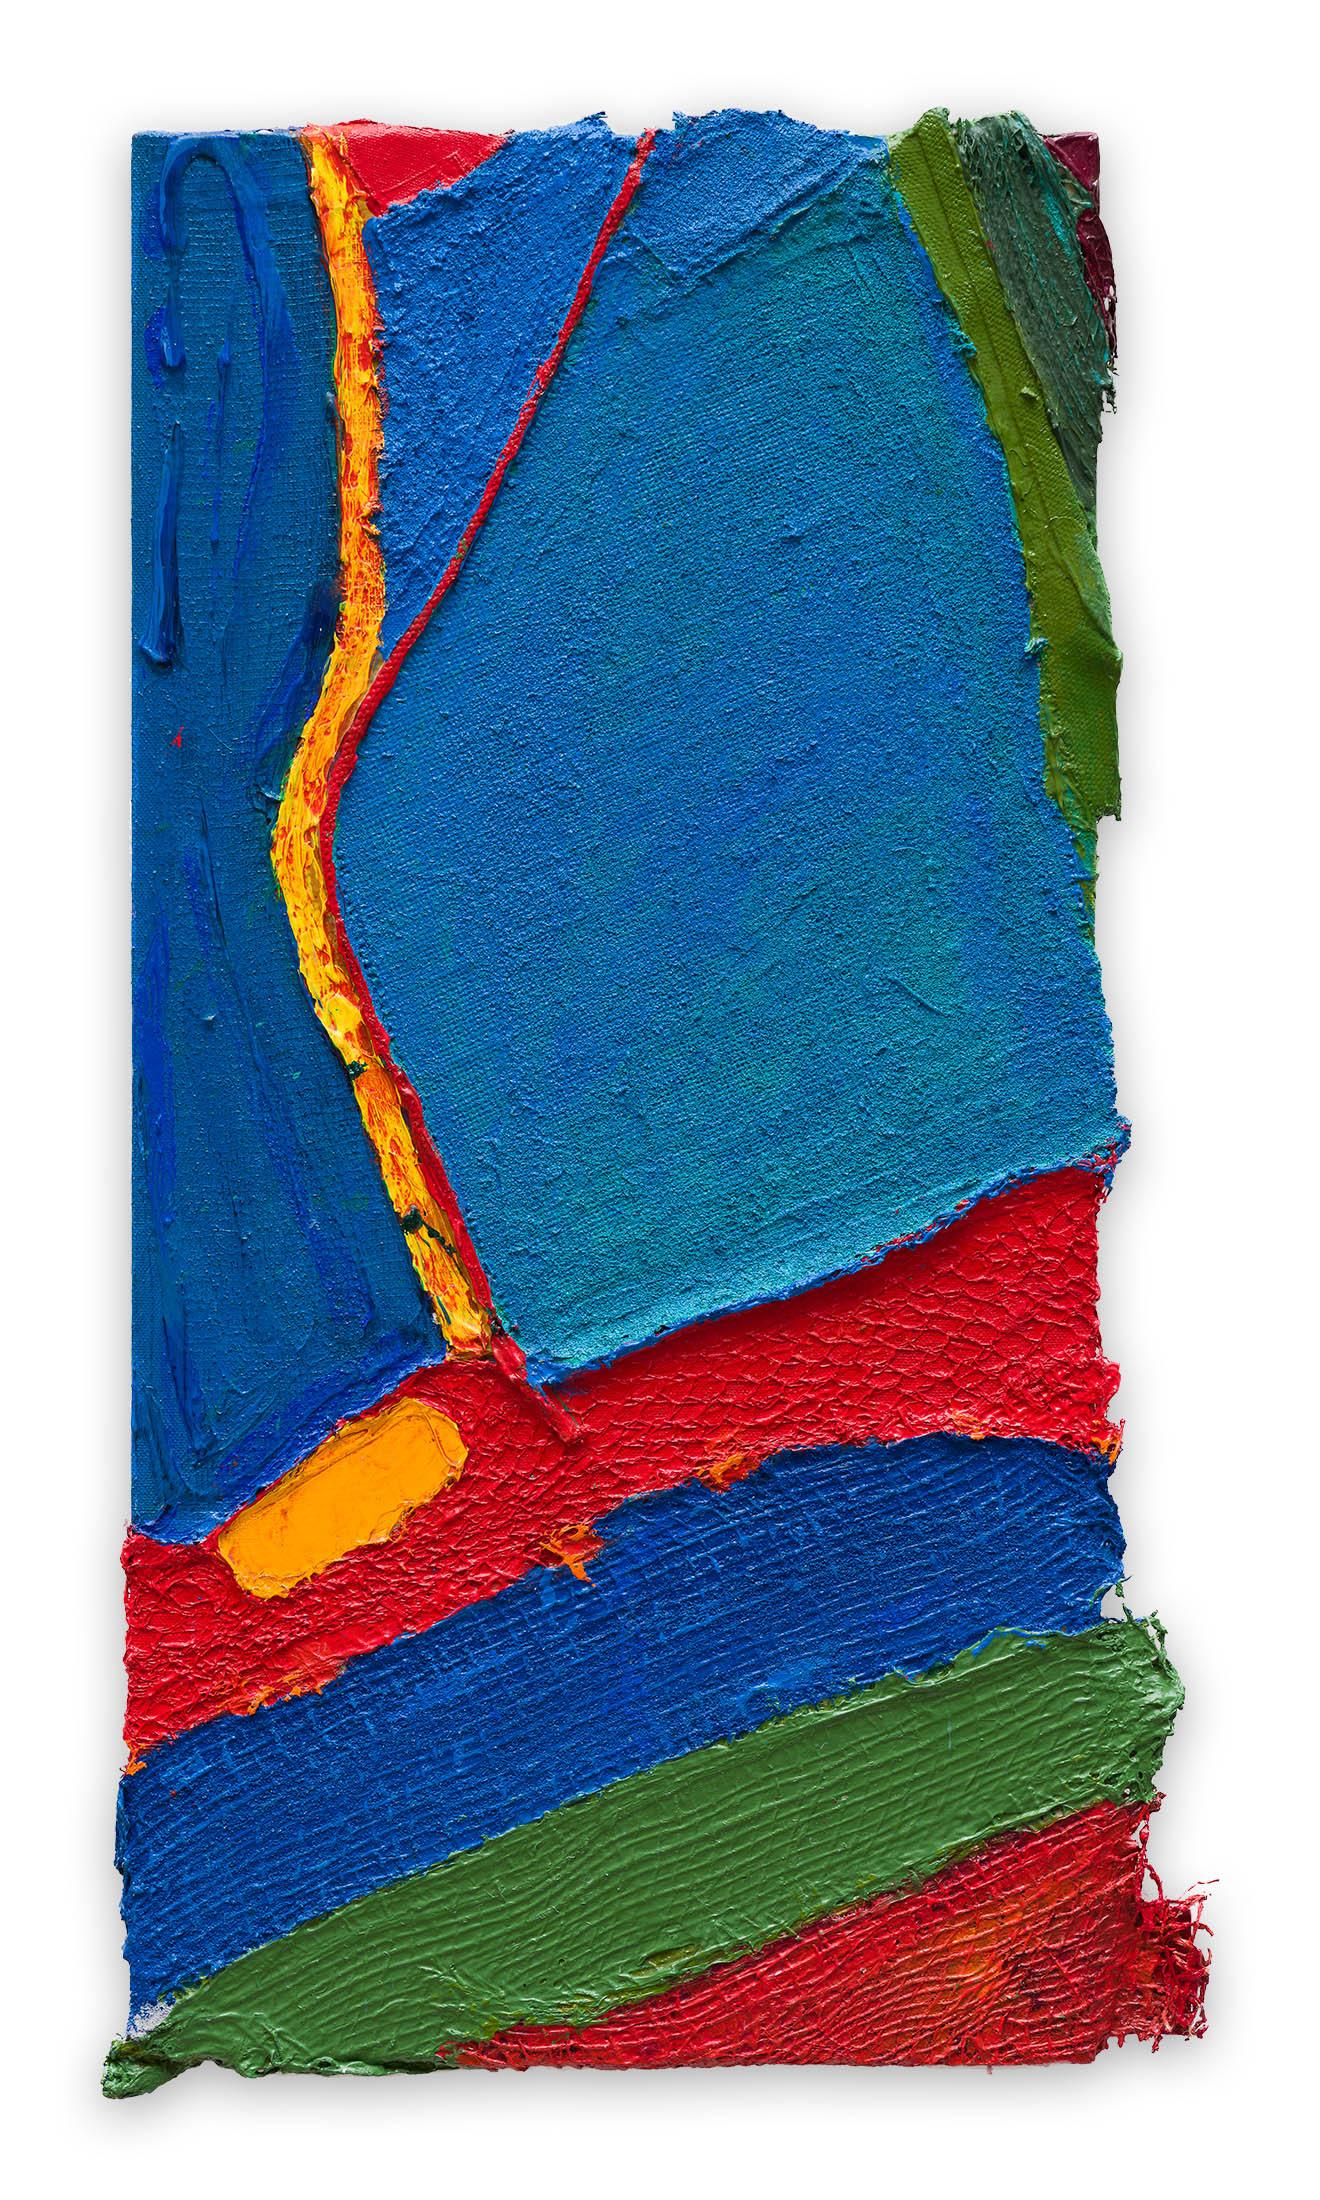 Electricity (Abstract Painting)

Acrylic and pumice on bootlace, fruit netting, Hessian scrim, plastic netting, cloth and canvas - Unframed.

Anthony Frost, son of Sir Terry Frost RA, is an English abstract artist whose vibrant, colorful paintings